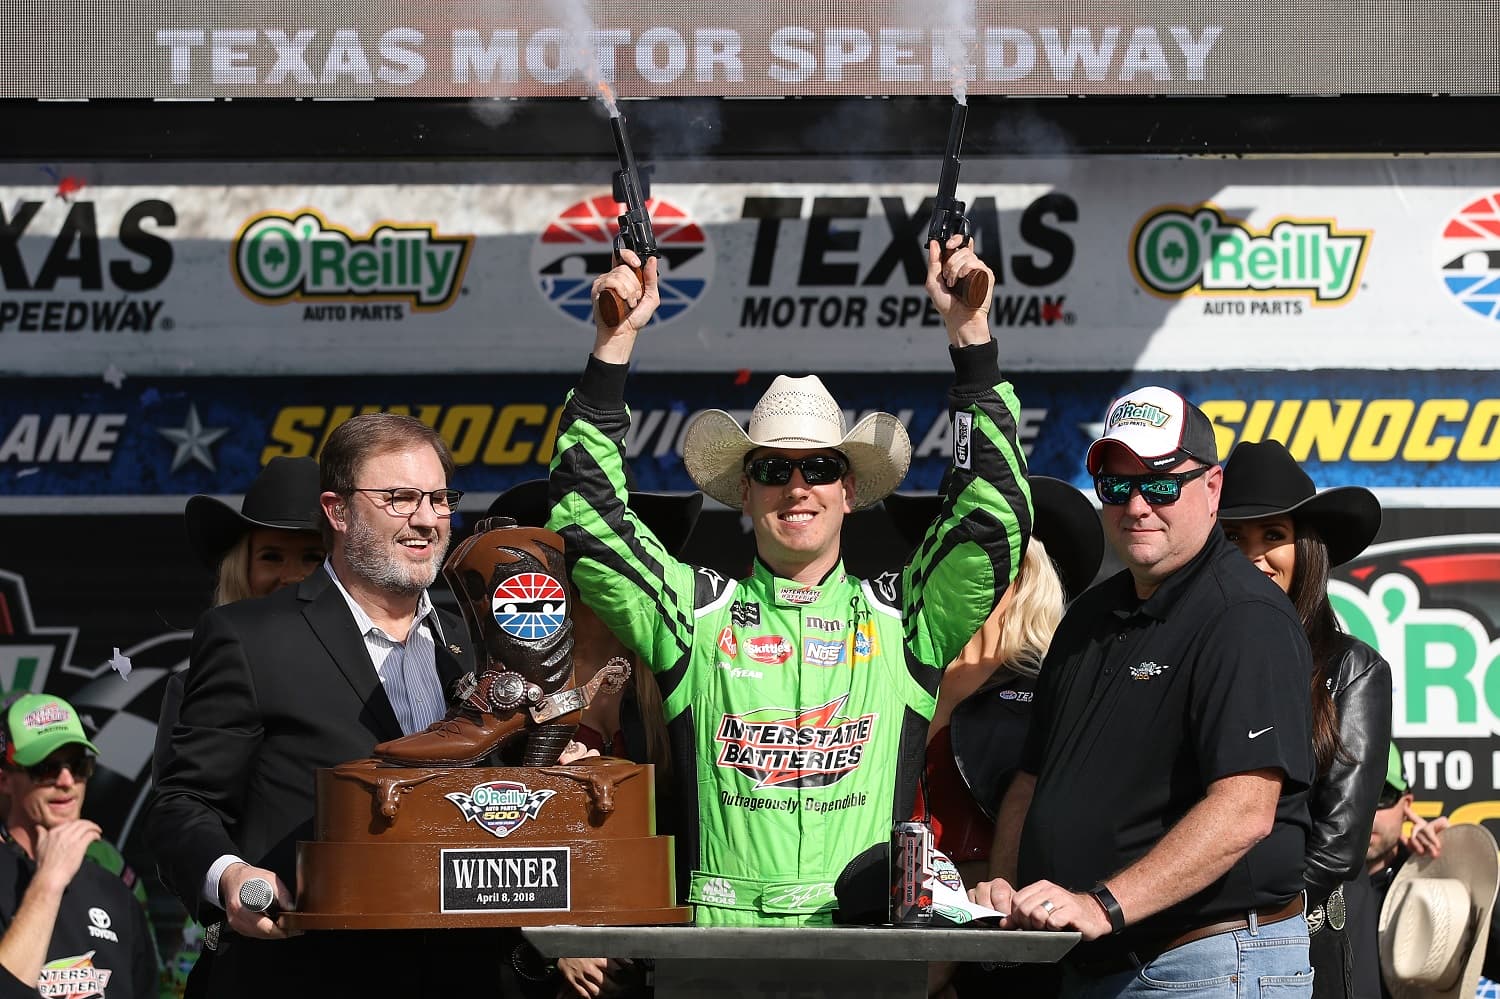 Kyle Busch celebrates in Victory Lane after winning the Monster Energy NASCAR Cup Series O'Reilly Auto Parts 500 at Texas Motor Speedway on April 8, 2018. | Chris Graythen/Getty Images